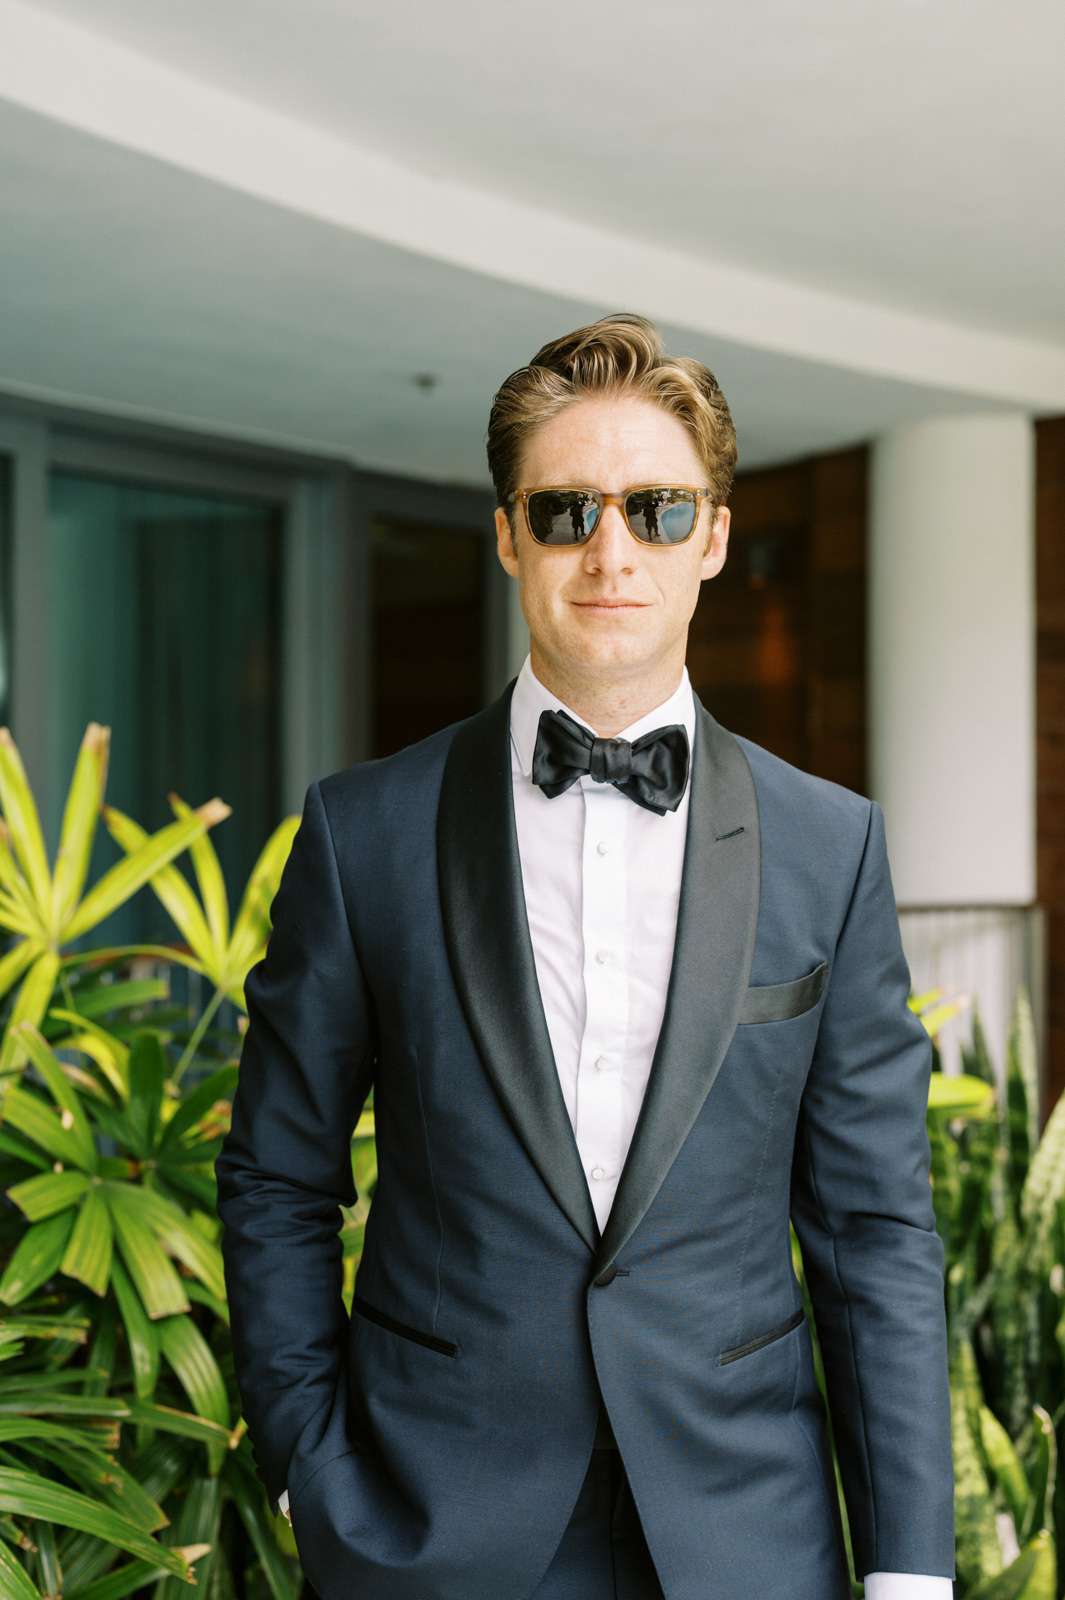 groom wearing a navy tuxedo with black lapels and sunglasses